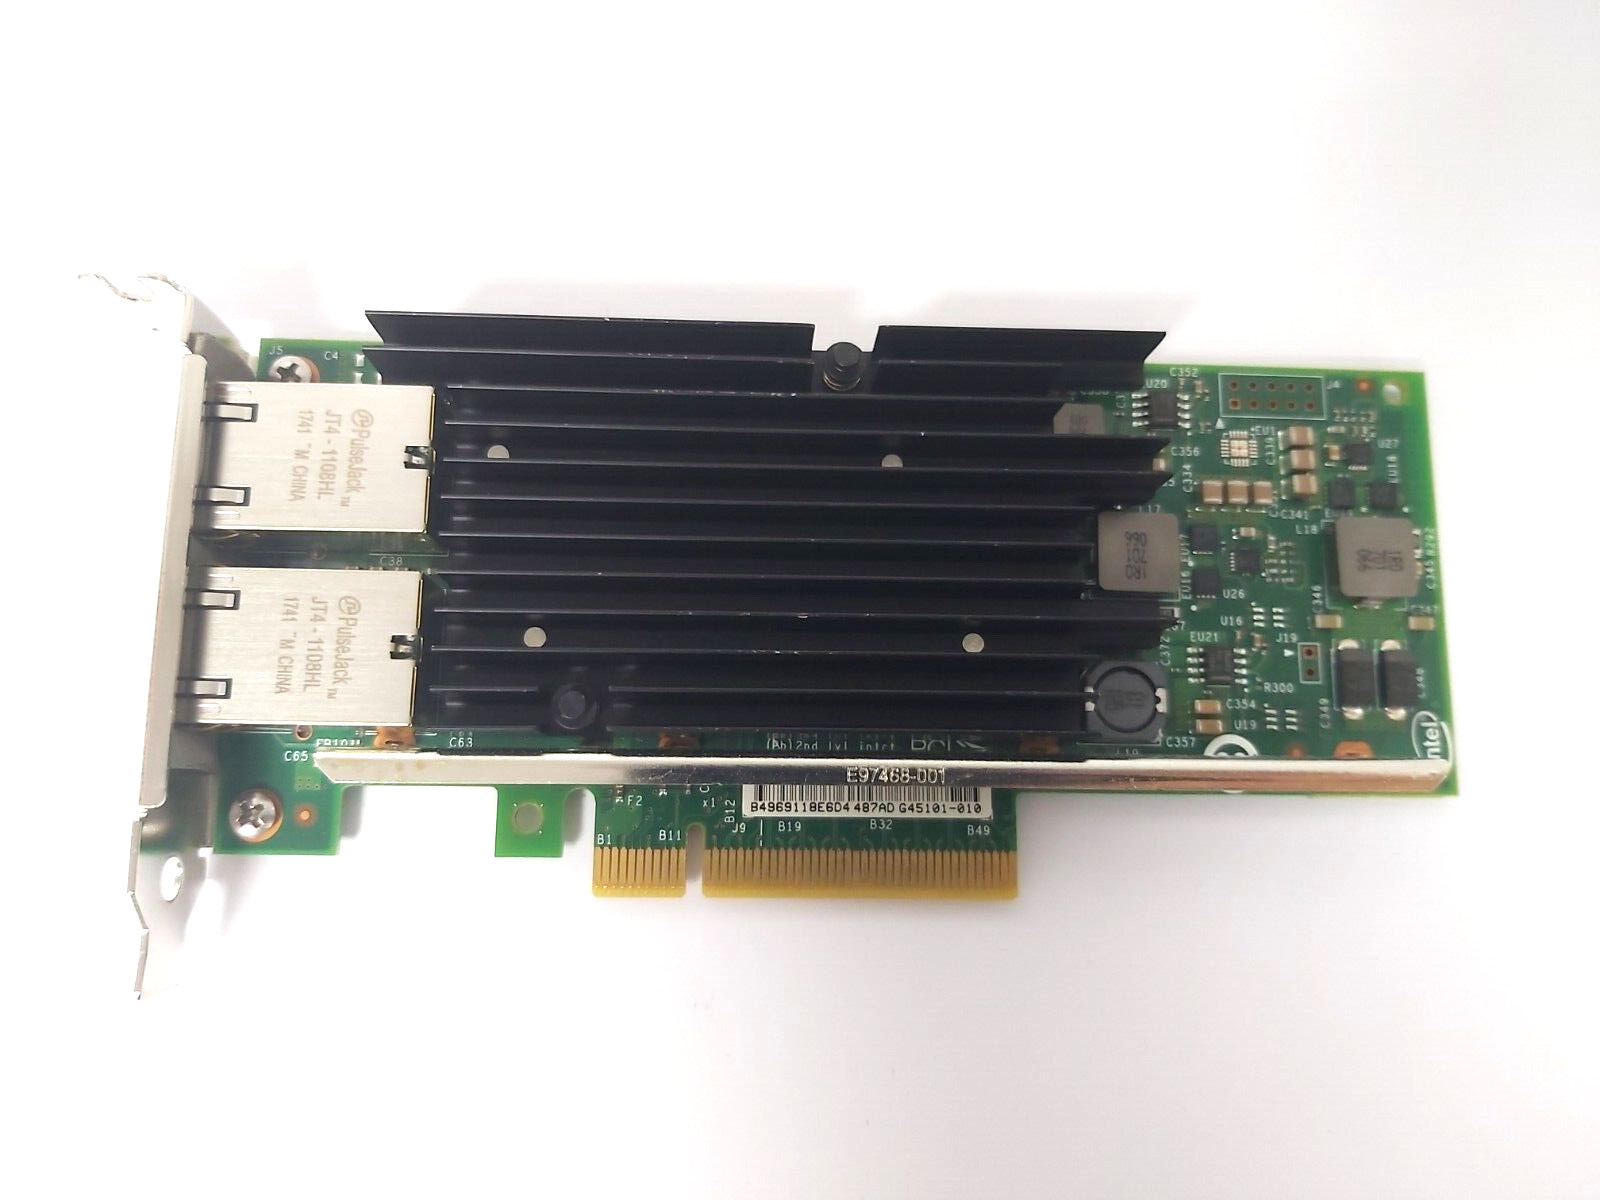 Sun Oracle 7070006 G58497 Dual-Port 10GbE Base-T Gen2 PCIe NIC Network Adapter